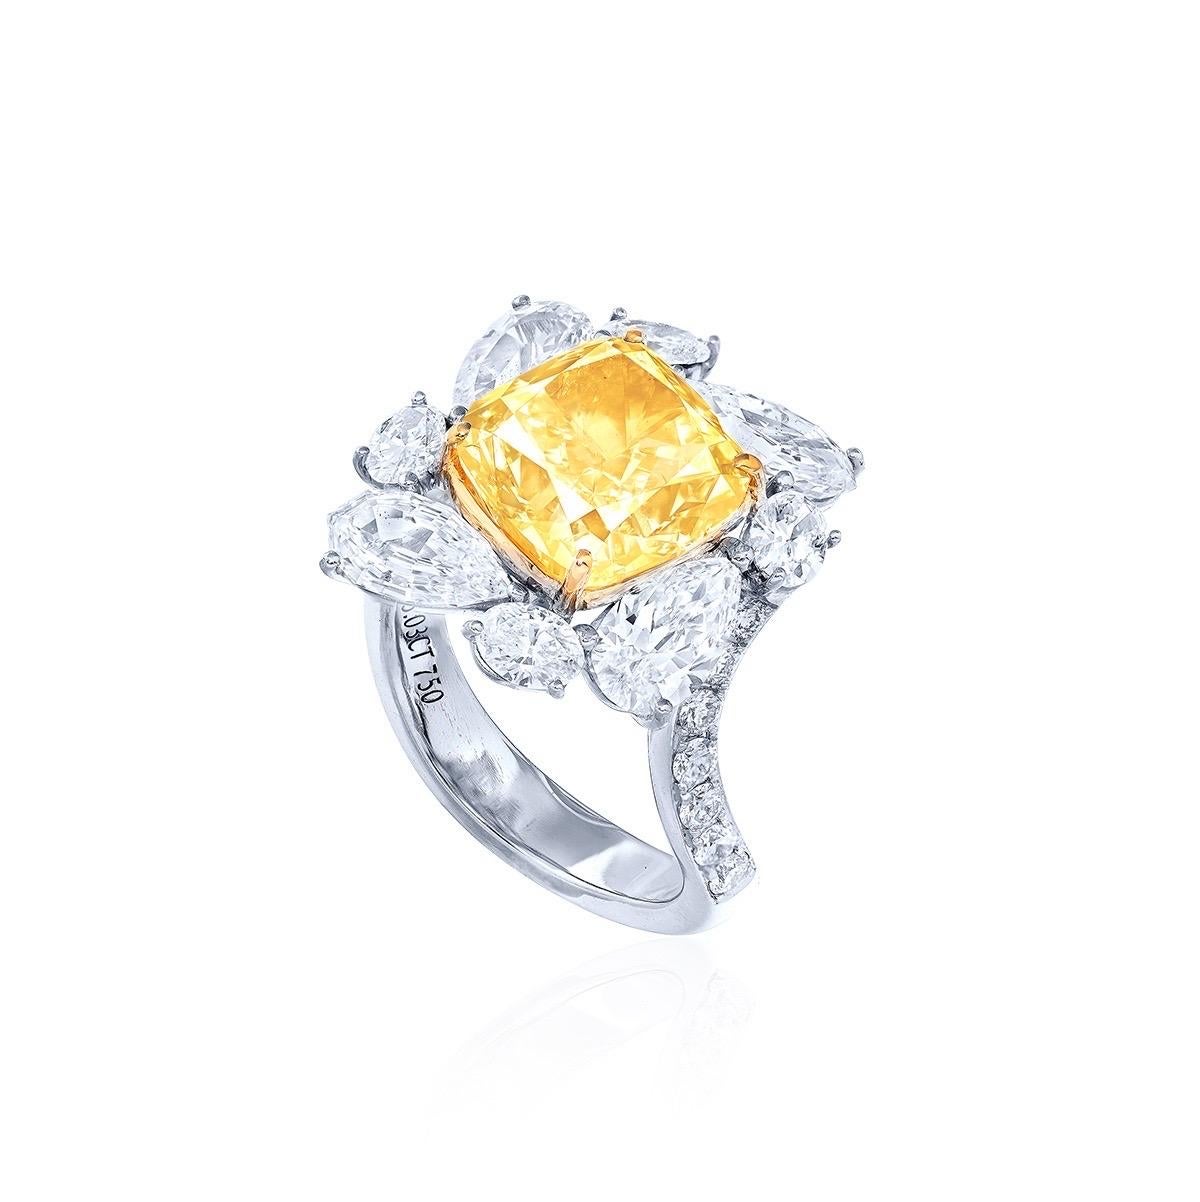 From the vault at Emilio Jewelry located on New York's iconic Fifth Avenue, 
Center Stone: 5.03 ct Fancy Yellow 
Setting: 34 white diamonds totaling about 0.44 carats, 4 fancy-turned oval white diamonds totaling about 0.55 carats, 4 fancy-turning